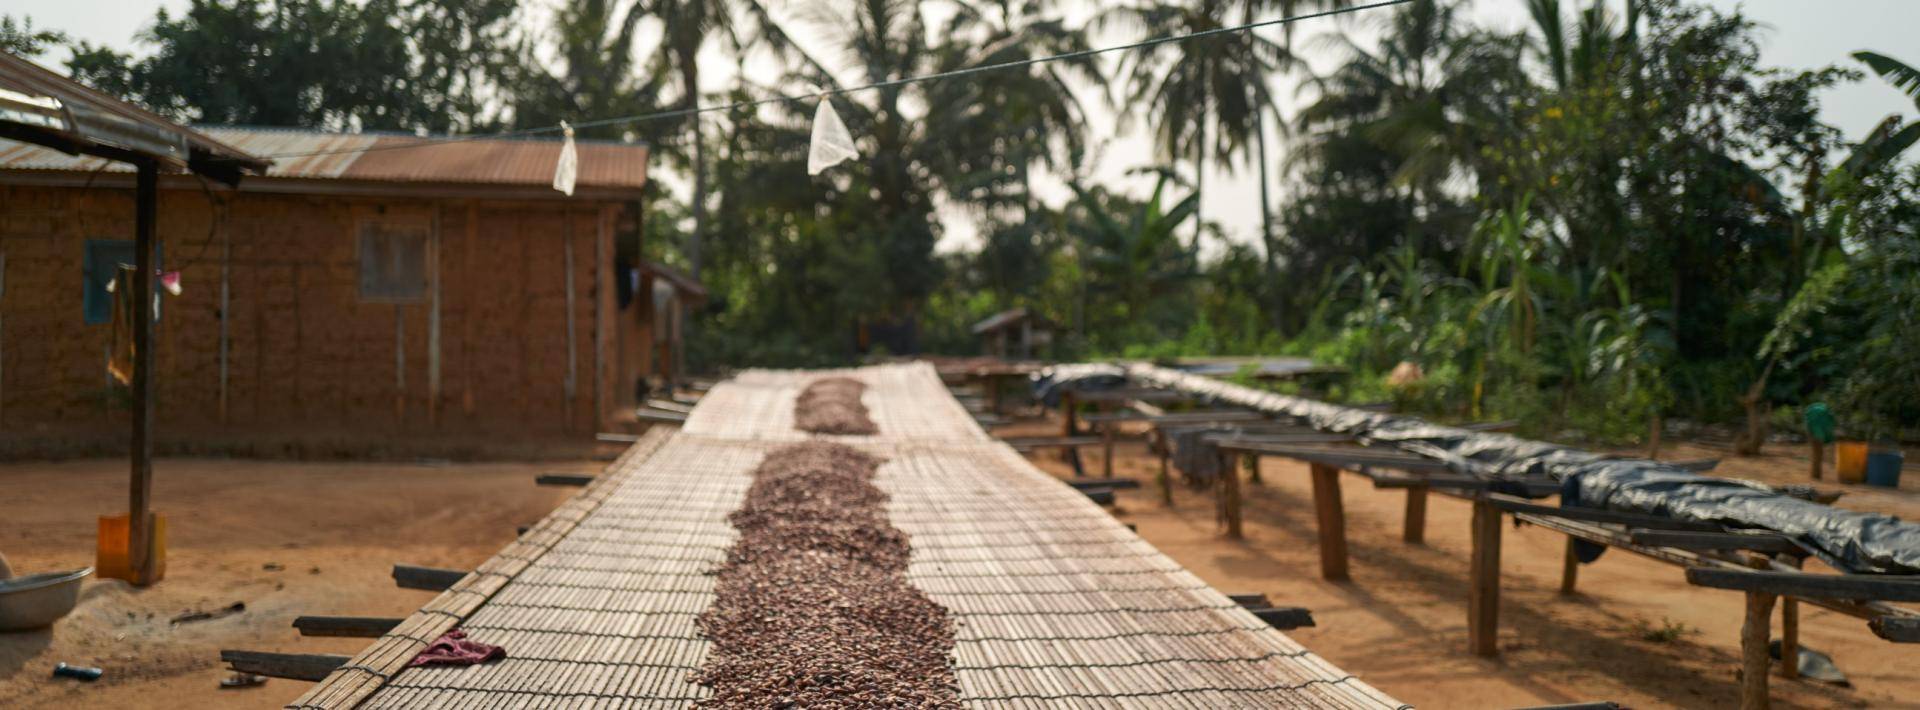 Cocoa beans drying under the sun